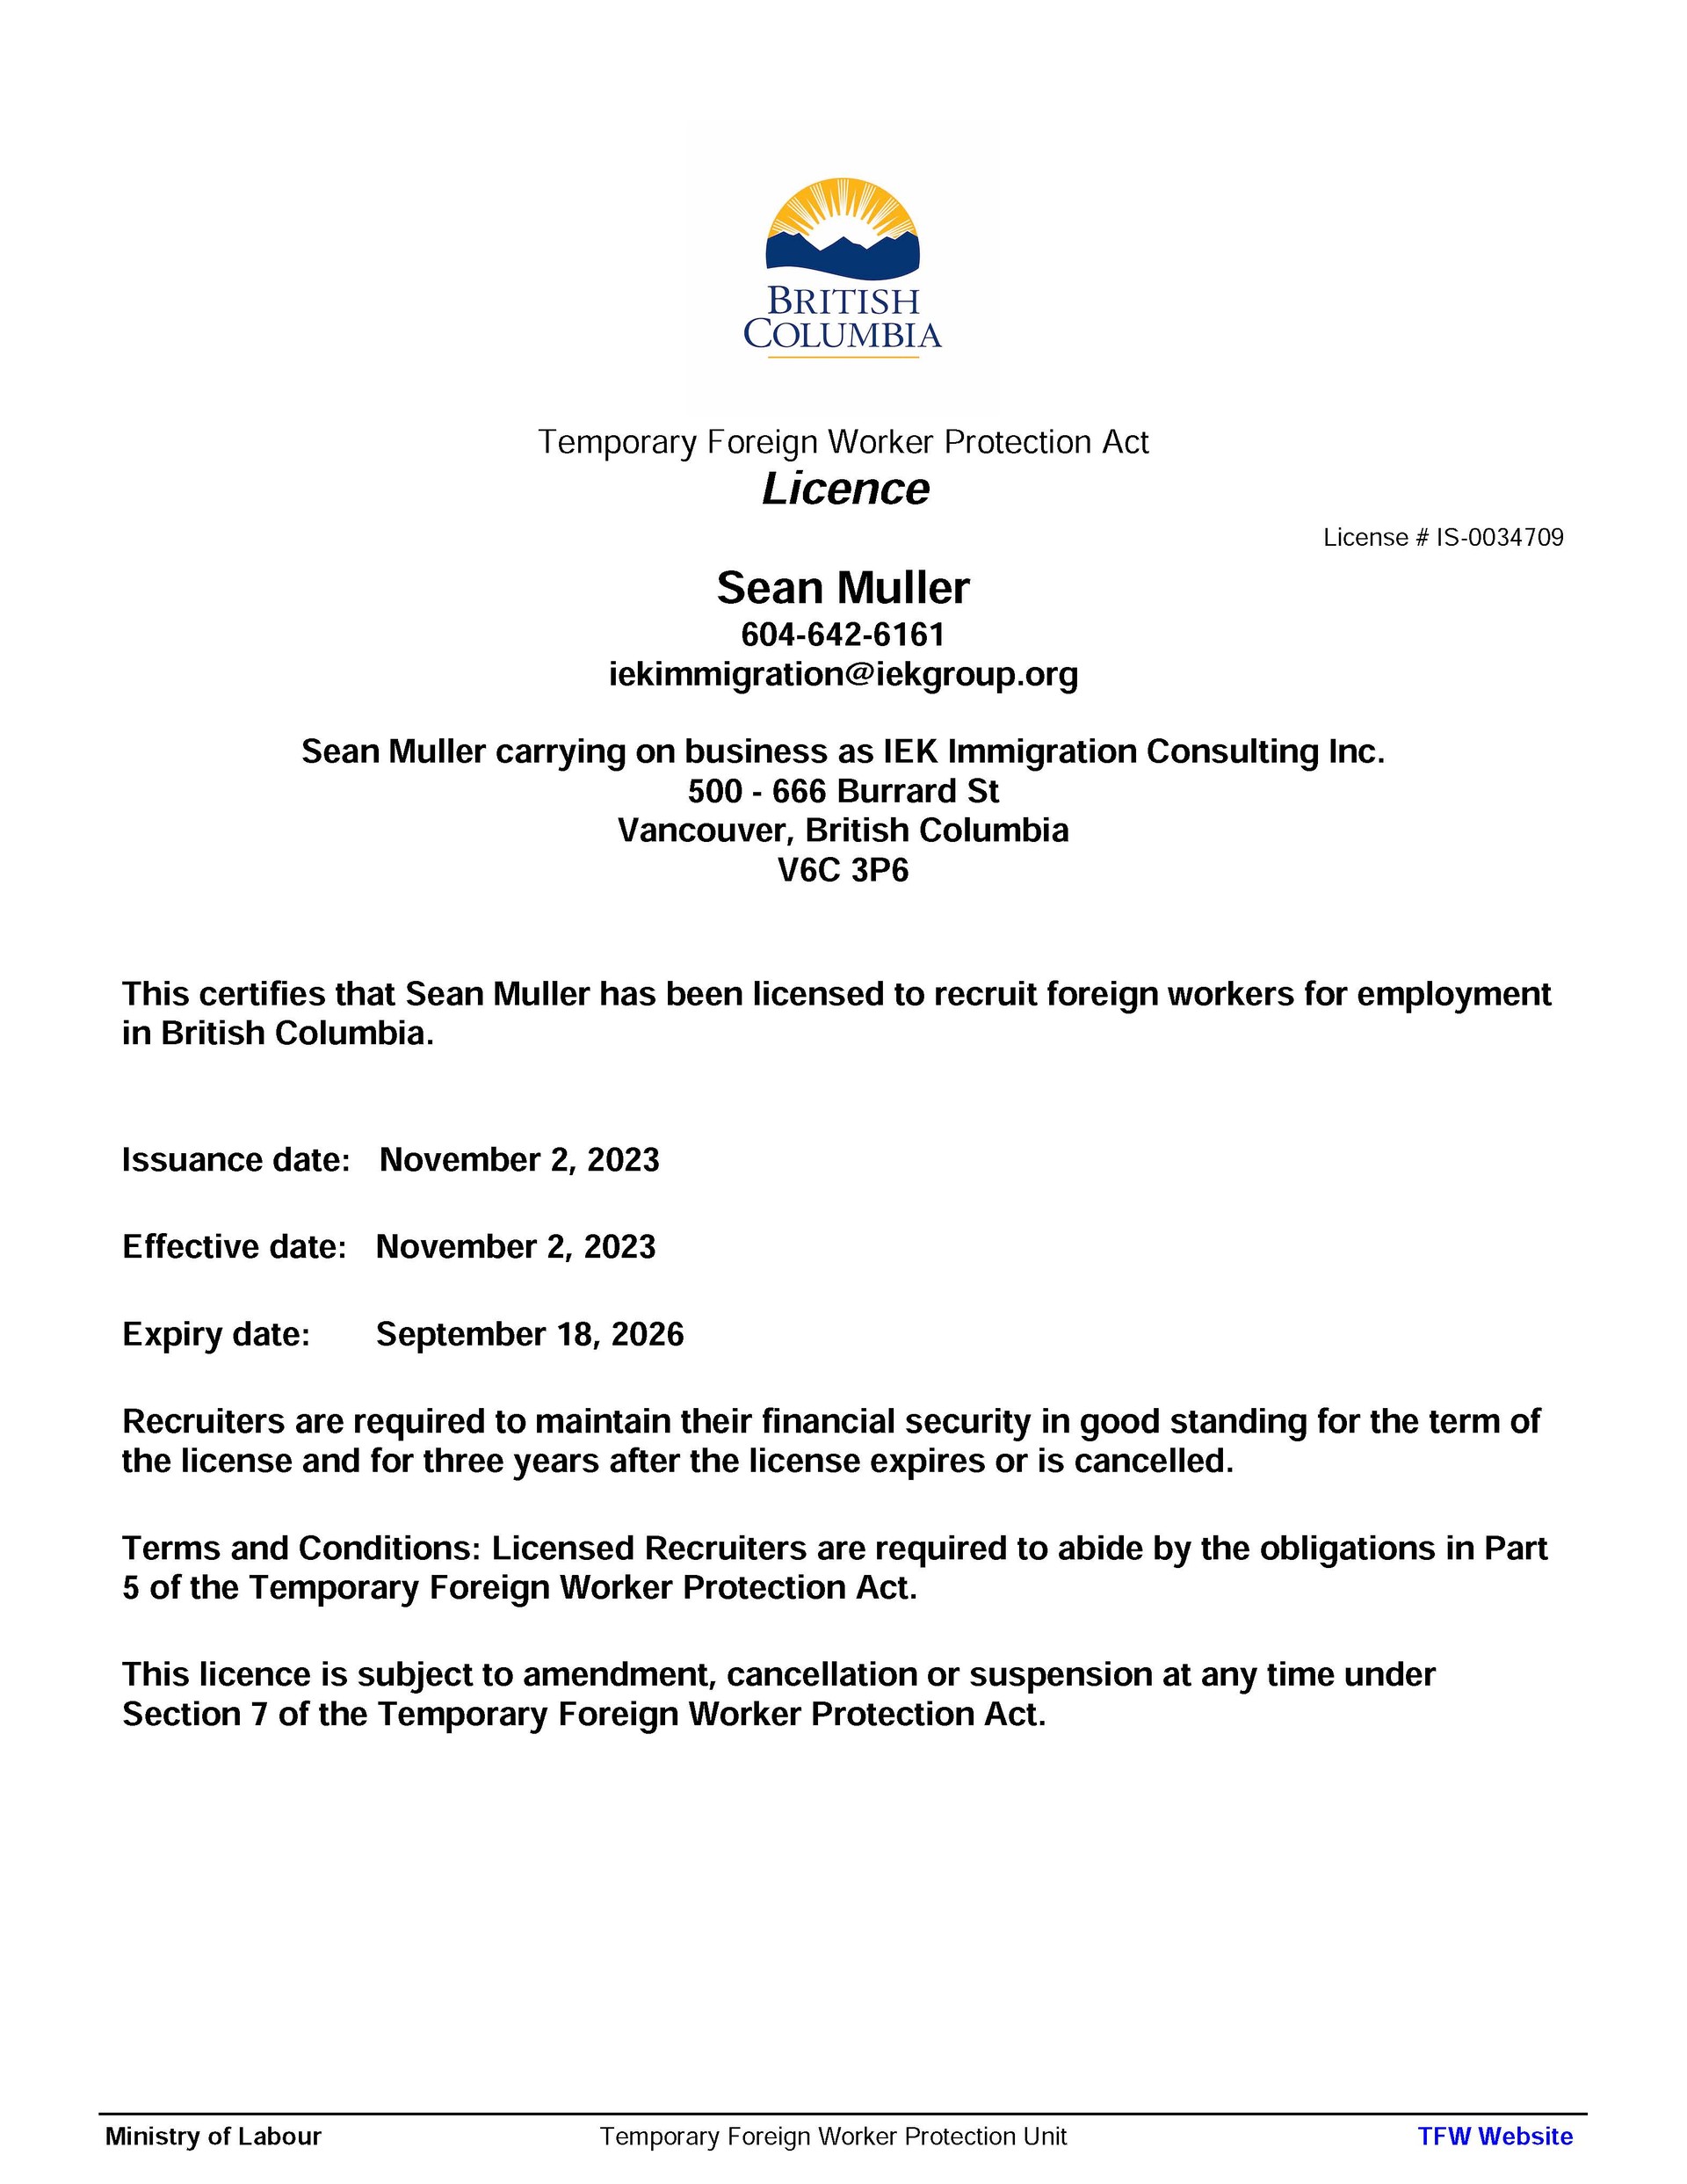 [Certificate of Recruit Foreign Workers for Employment in British Columbia]